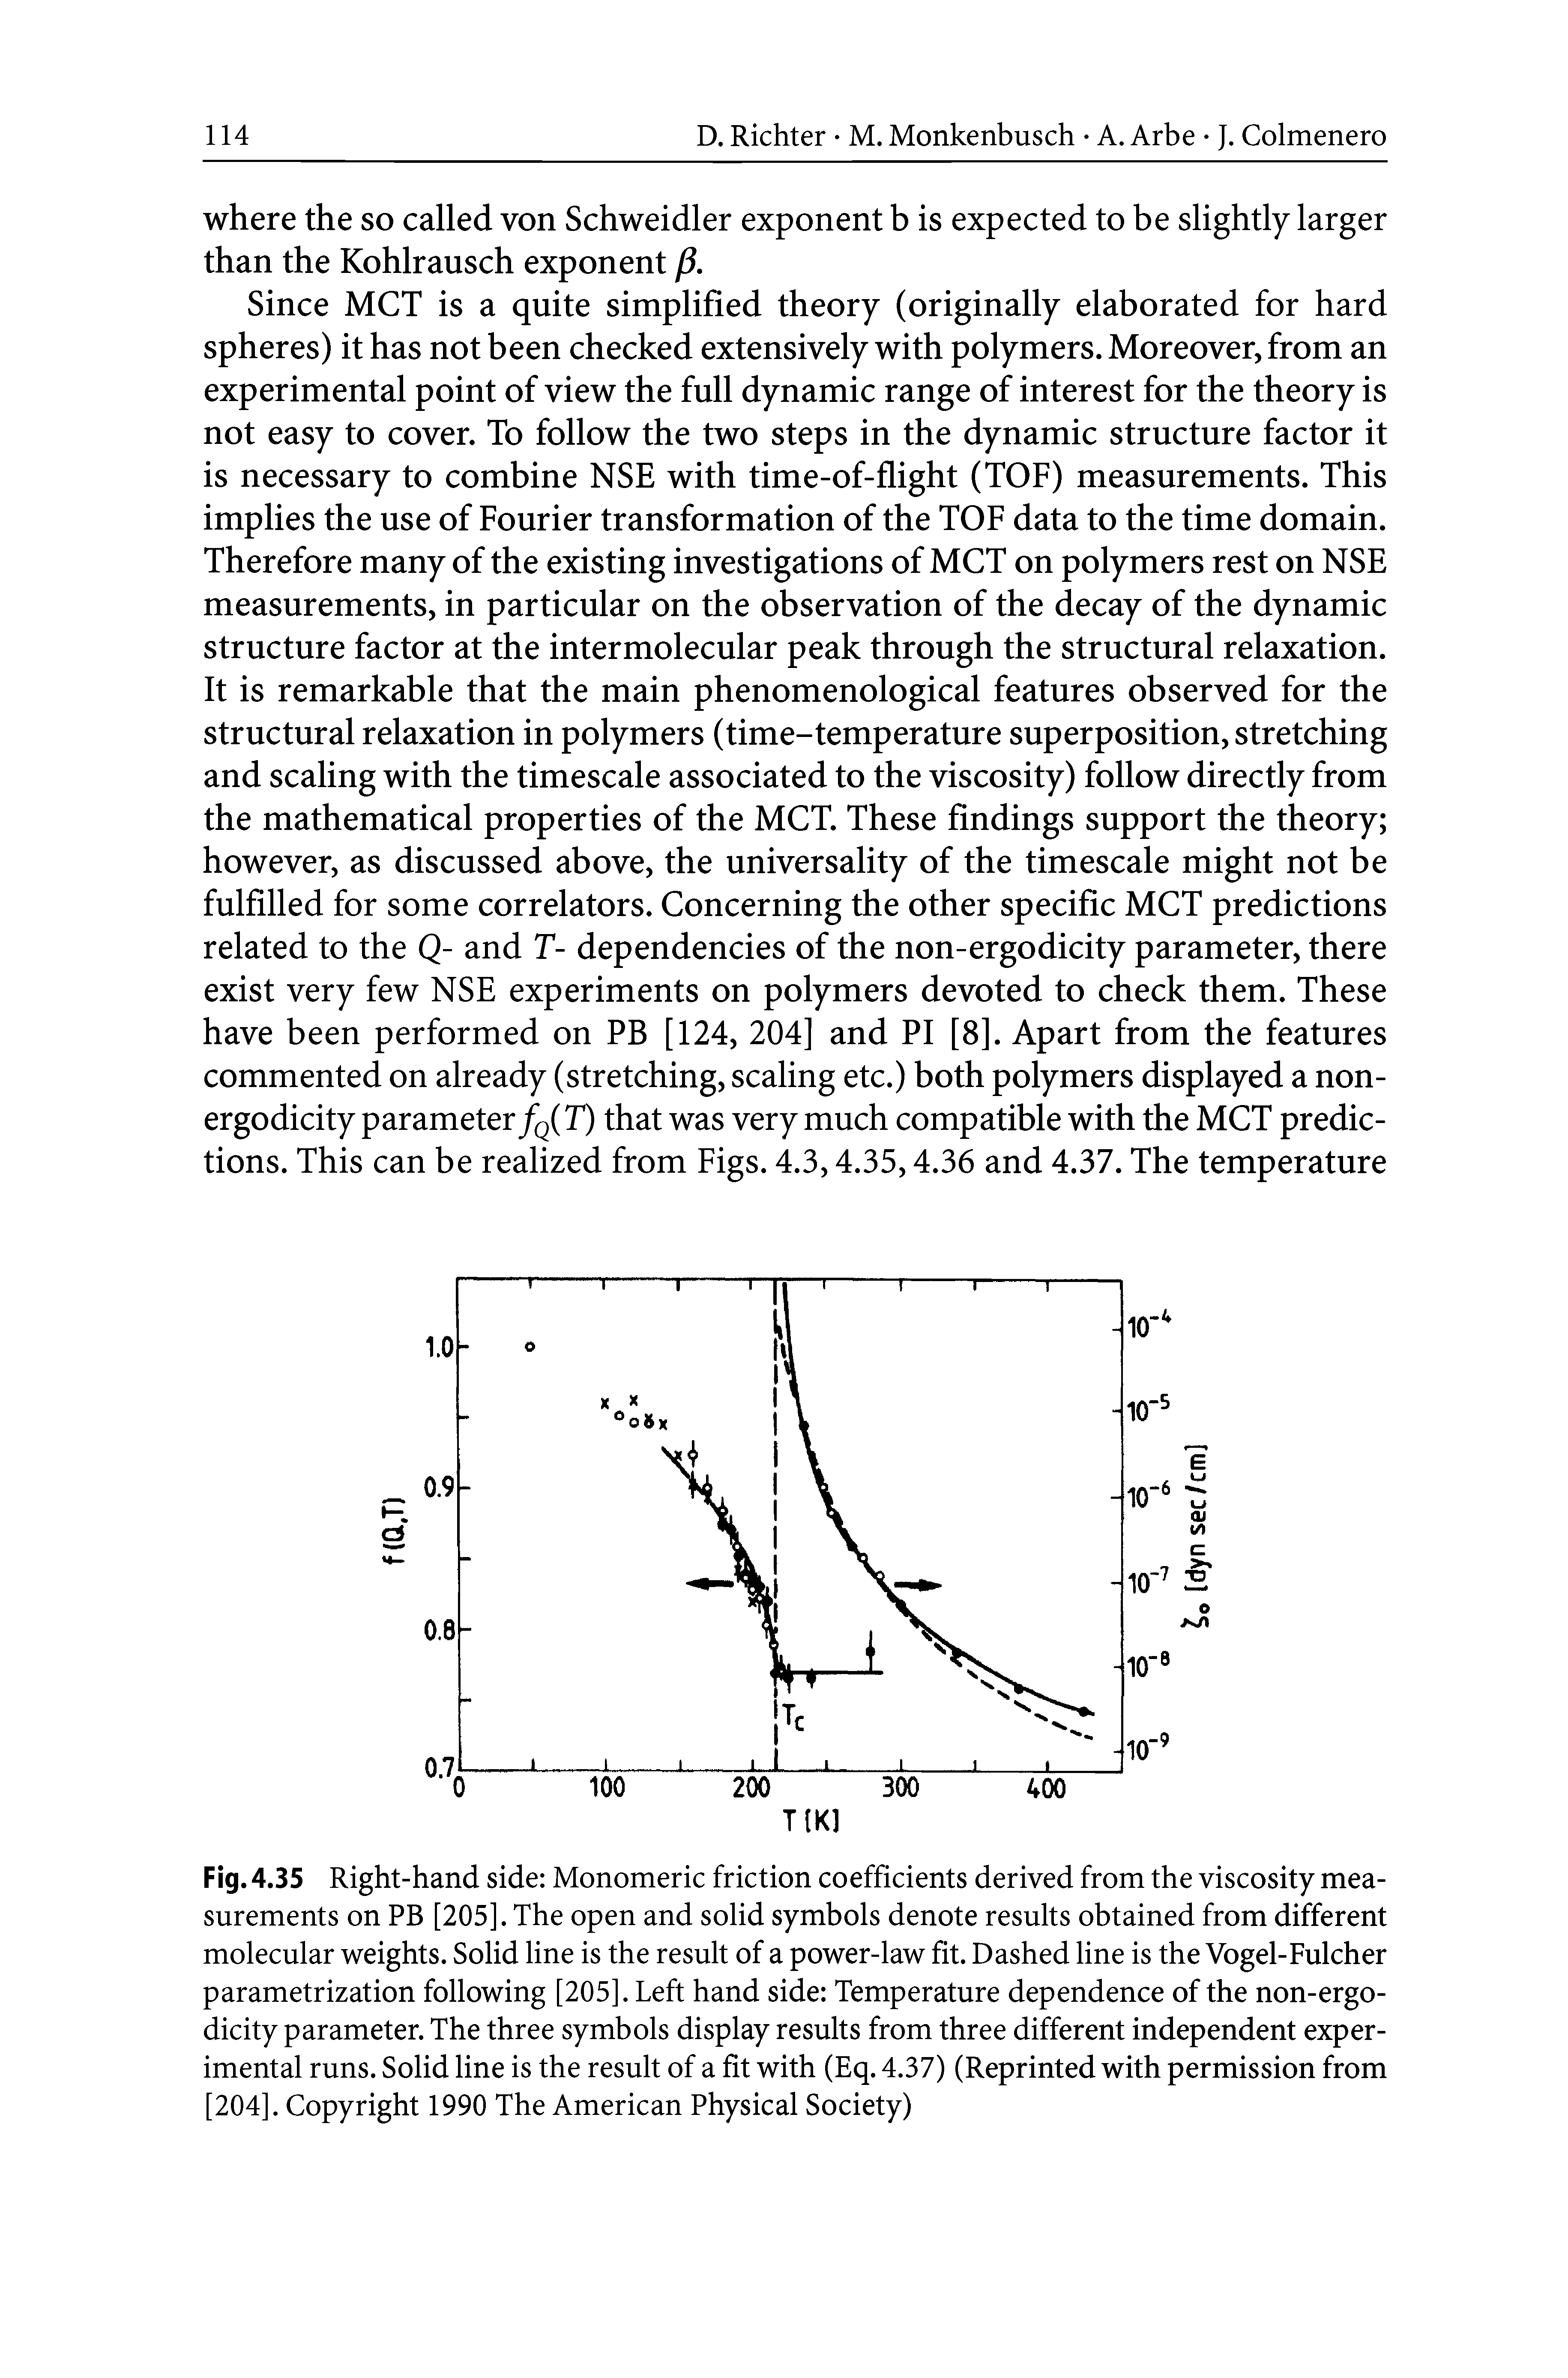 Fig. 4.35 Right-hand side Monomeric friction coefficients derived from the viscosity measurements on PB [205]. The open and solid symbols denote results obtained from different molecular weights. Solid line is the result of a power-law fit. Dashed line is the Vogel-Fulcher parametrization following [205]. Left hand side Temperature dependence of the non-ergodicity parameter. The three symbols display results from three different independent experimental runs. Solid line is the result of a fit with (Eq. 4.37) (Reprinted with permission from [204]. Copyright 1990 The American Physical Society)...